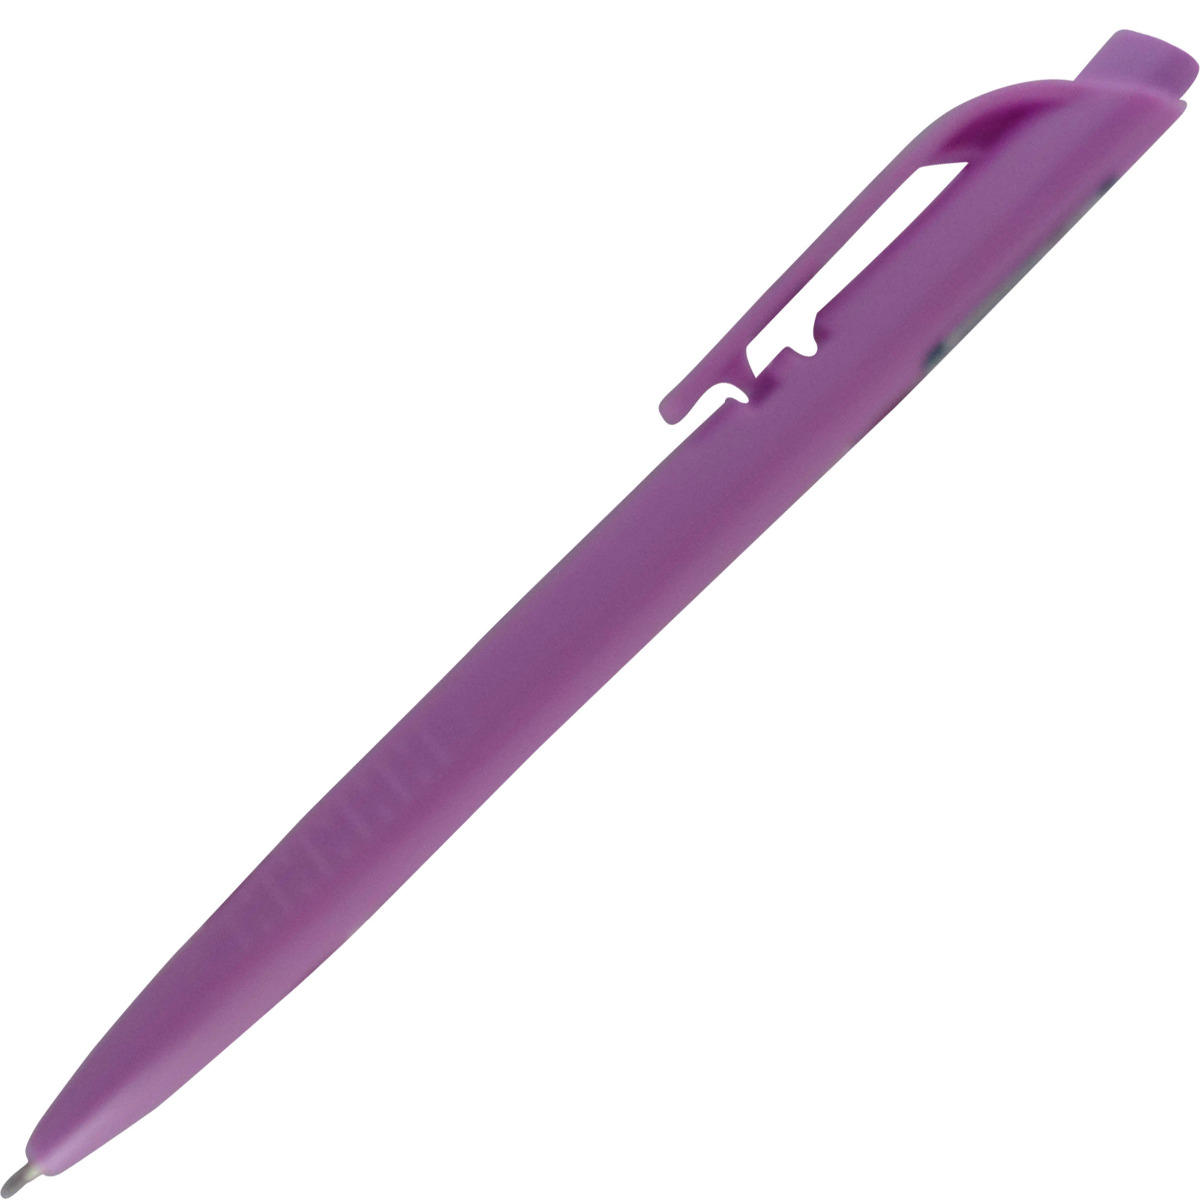 Hauser Billi Model: 13627 Lavender color body with Blue ink fine Tip Rectractable ball pen